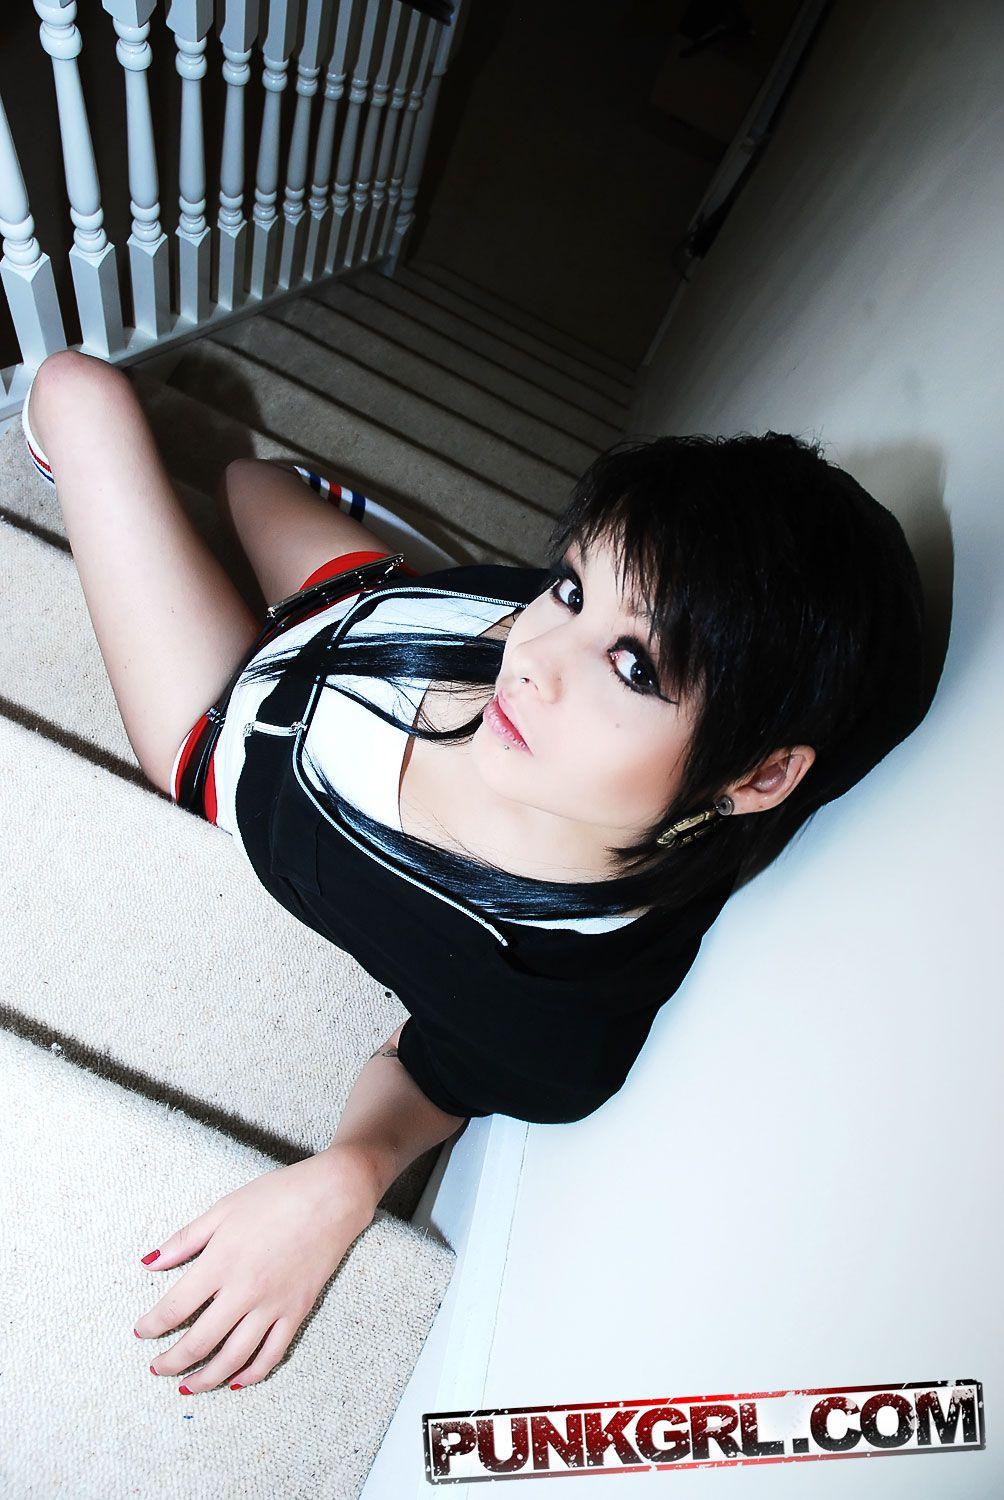 Pictures of punk teen Kitten teasing you on the stairs #58759573